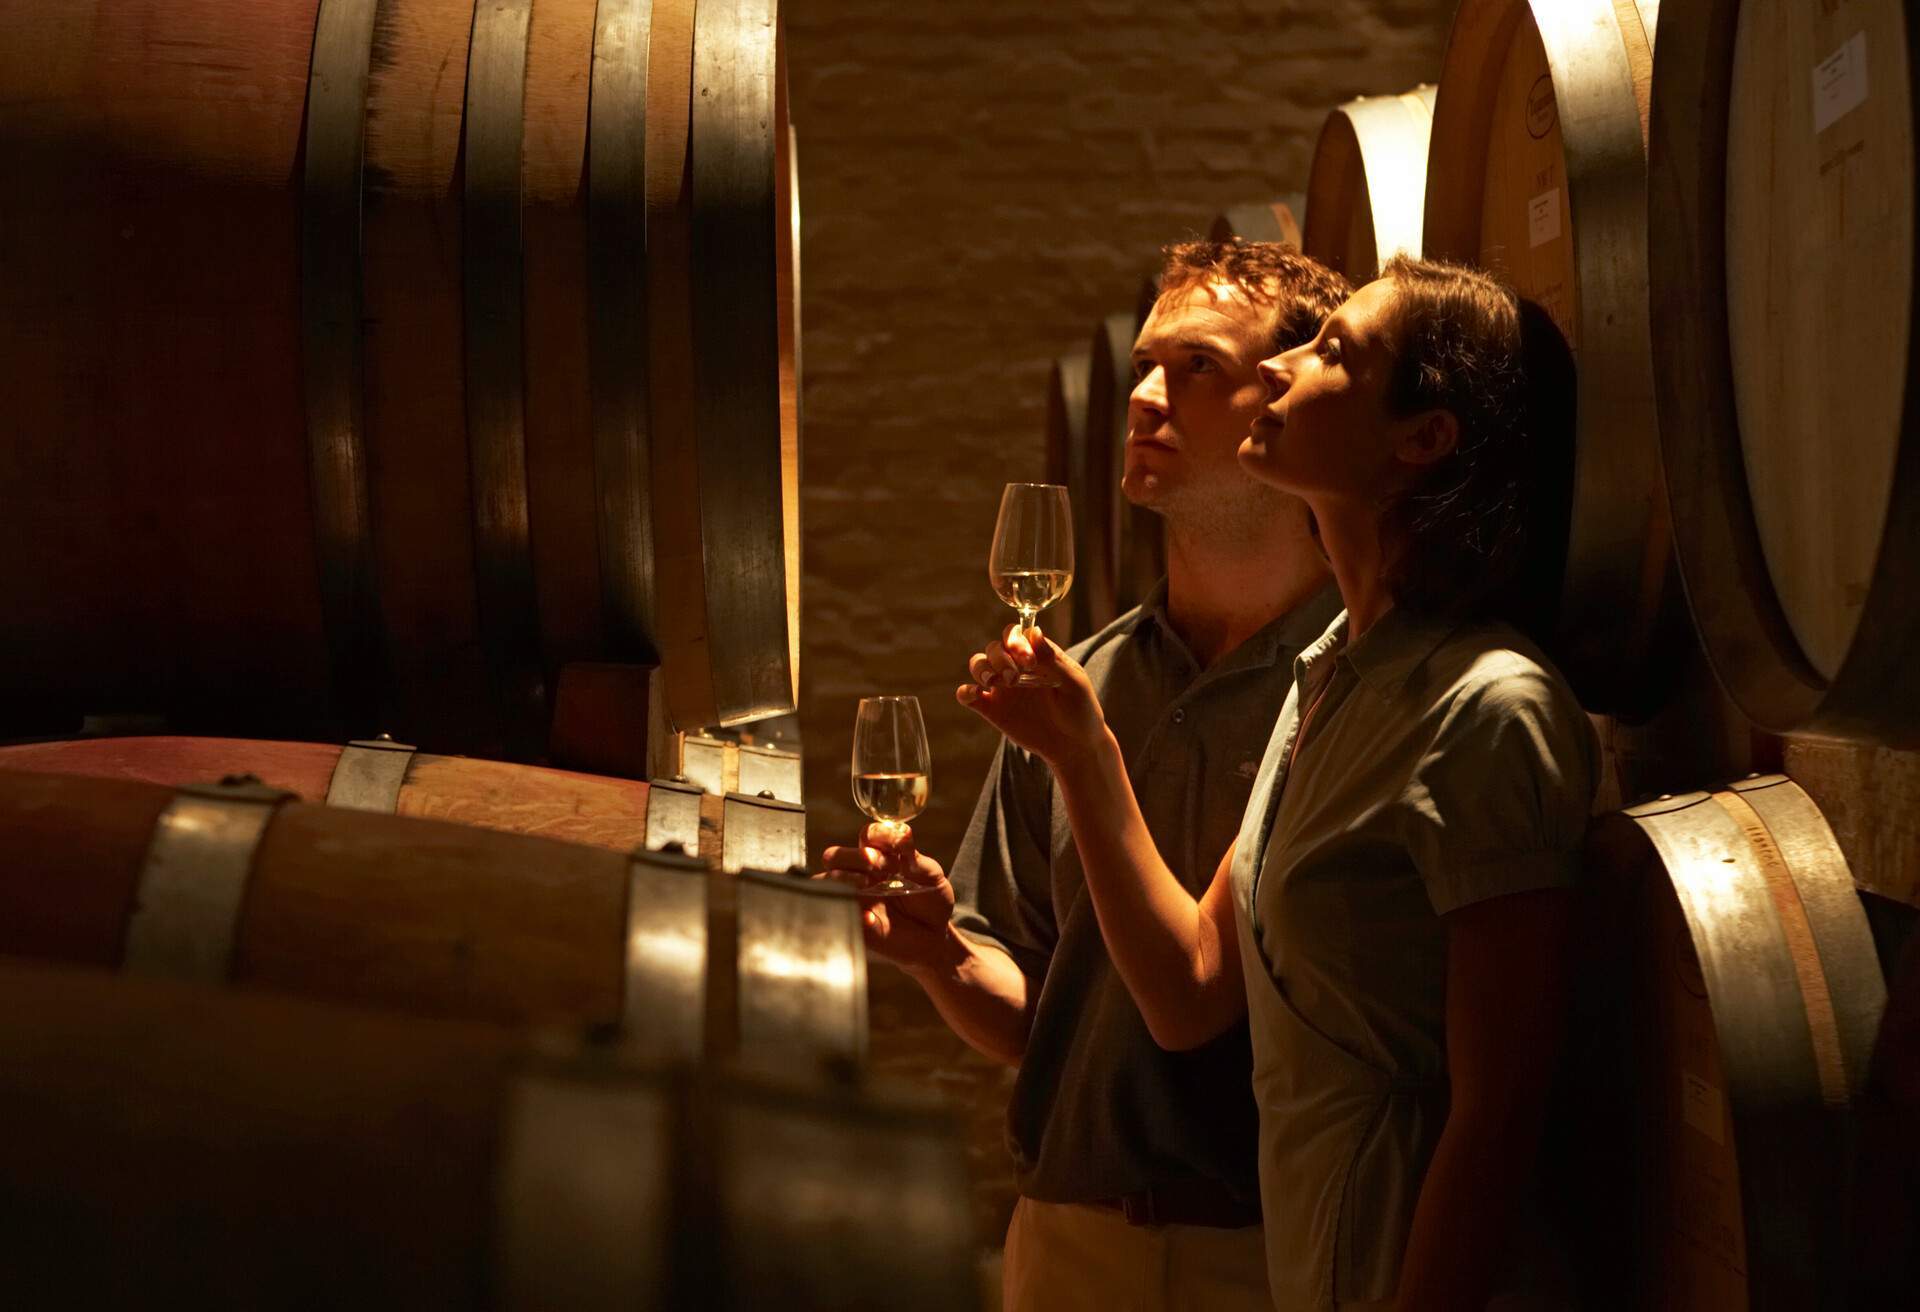 A man and a woman having white wine inside a wine cellar.